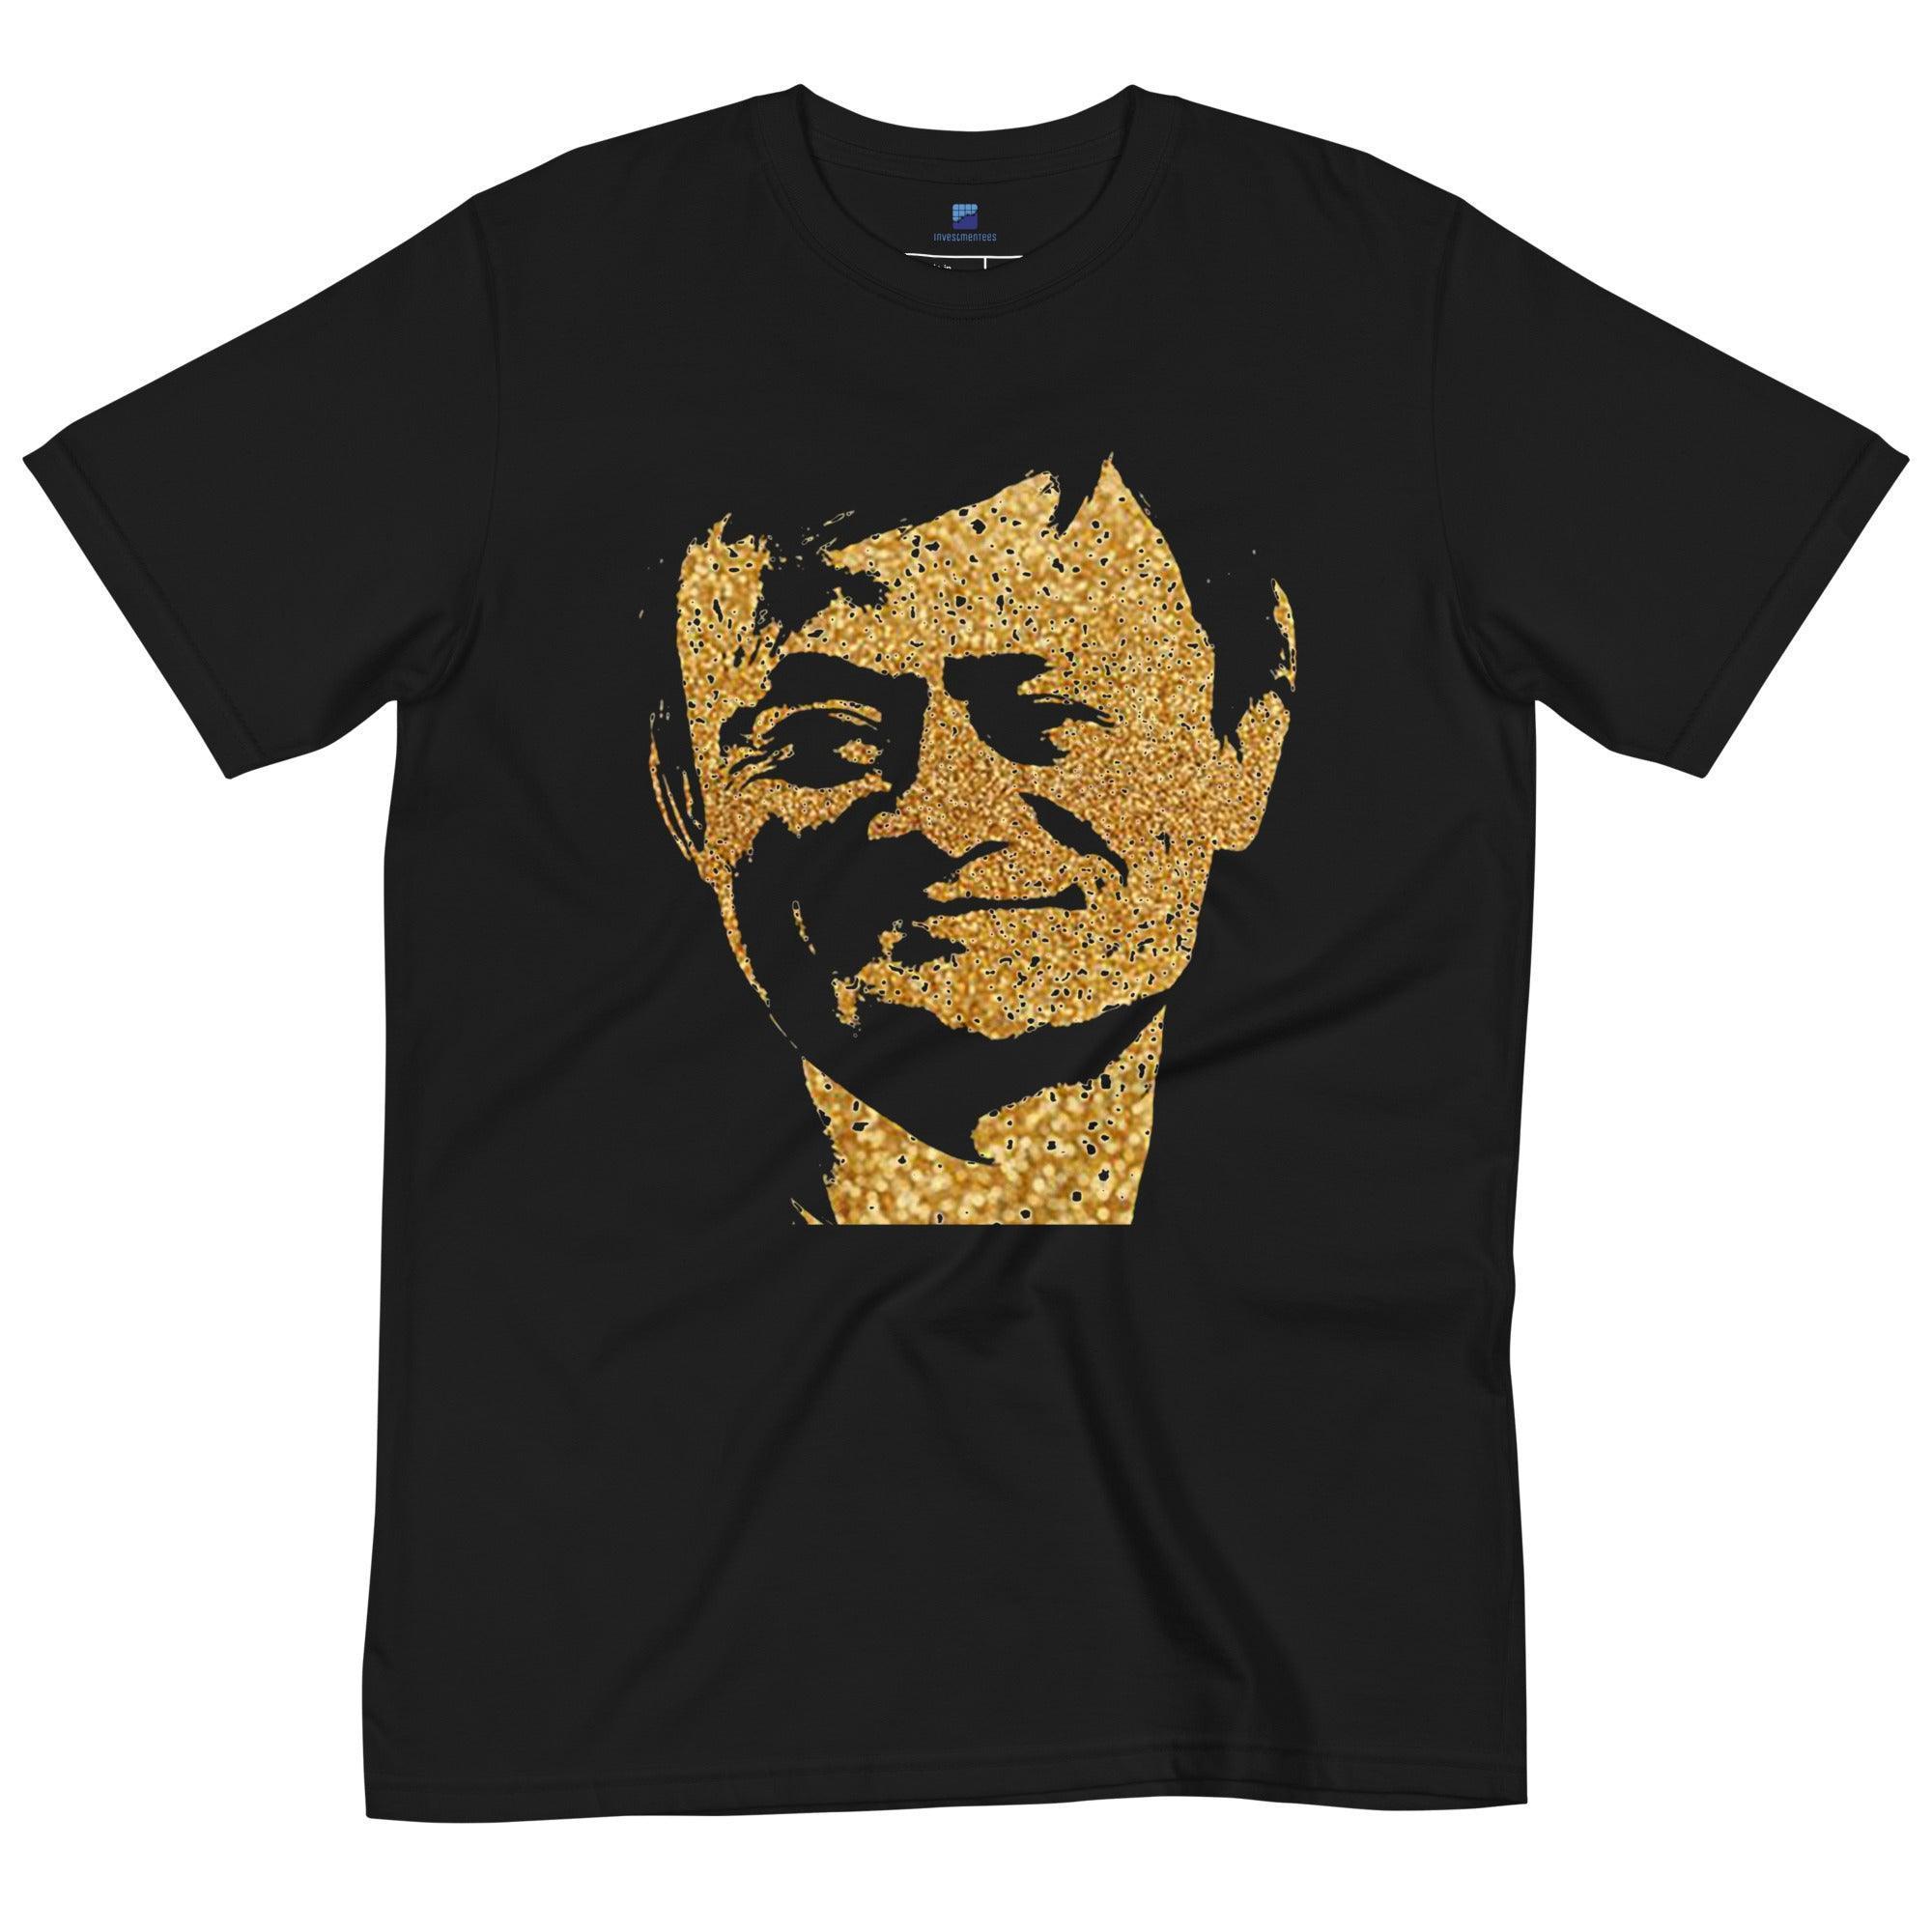 Jack Ma Gold T-Shirt - InvestmenTees